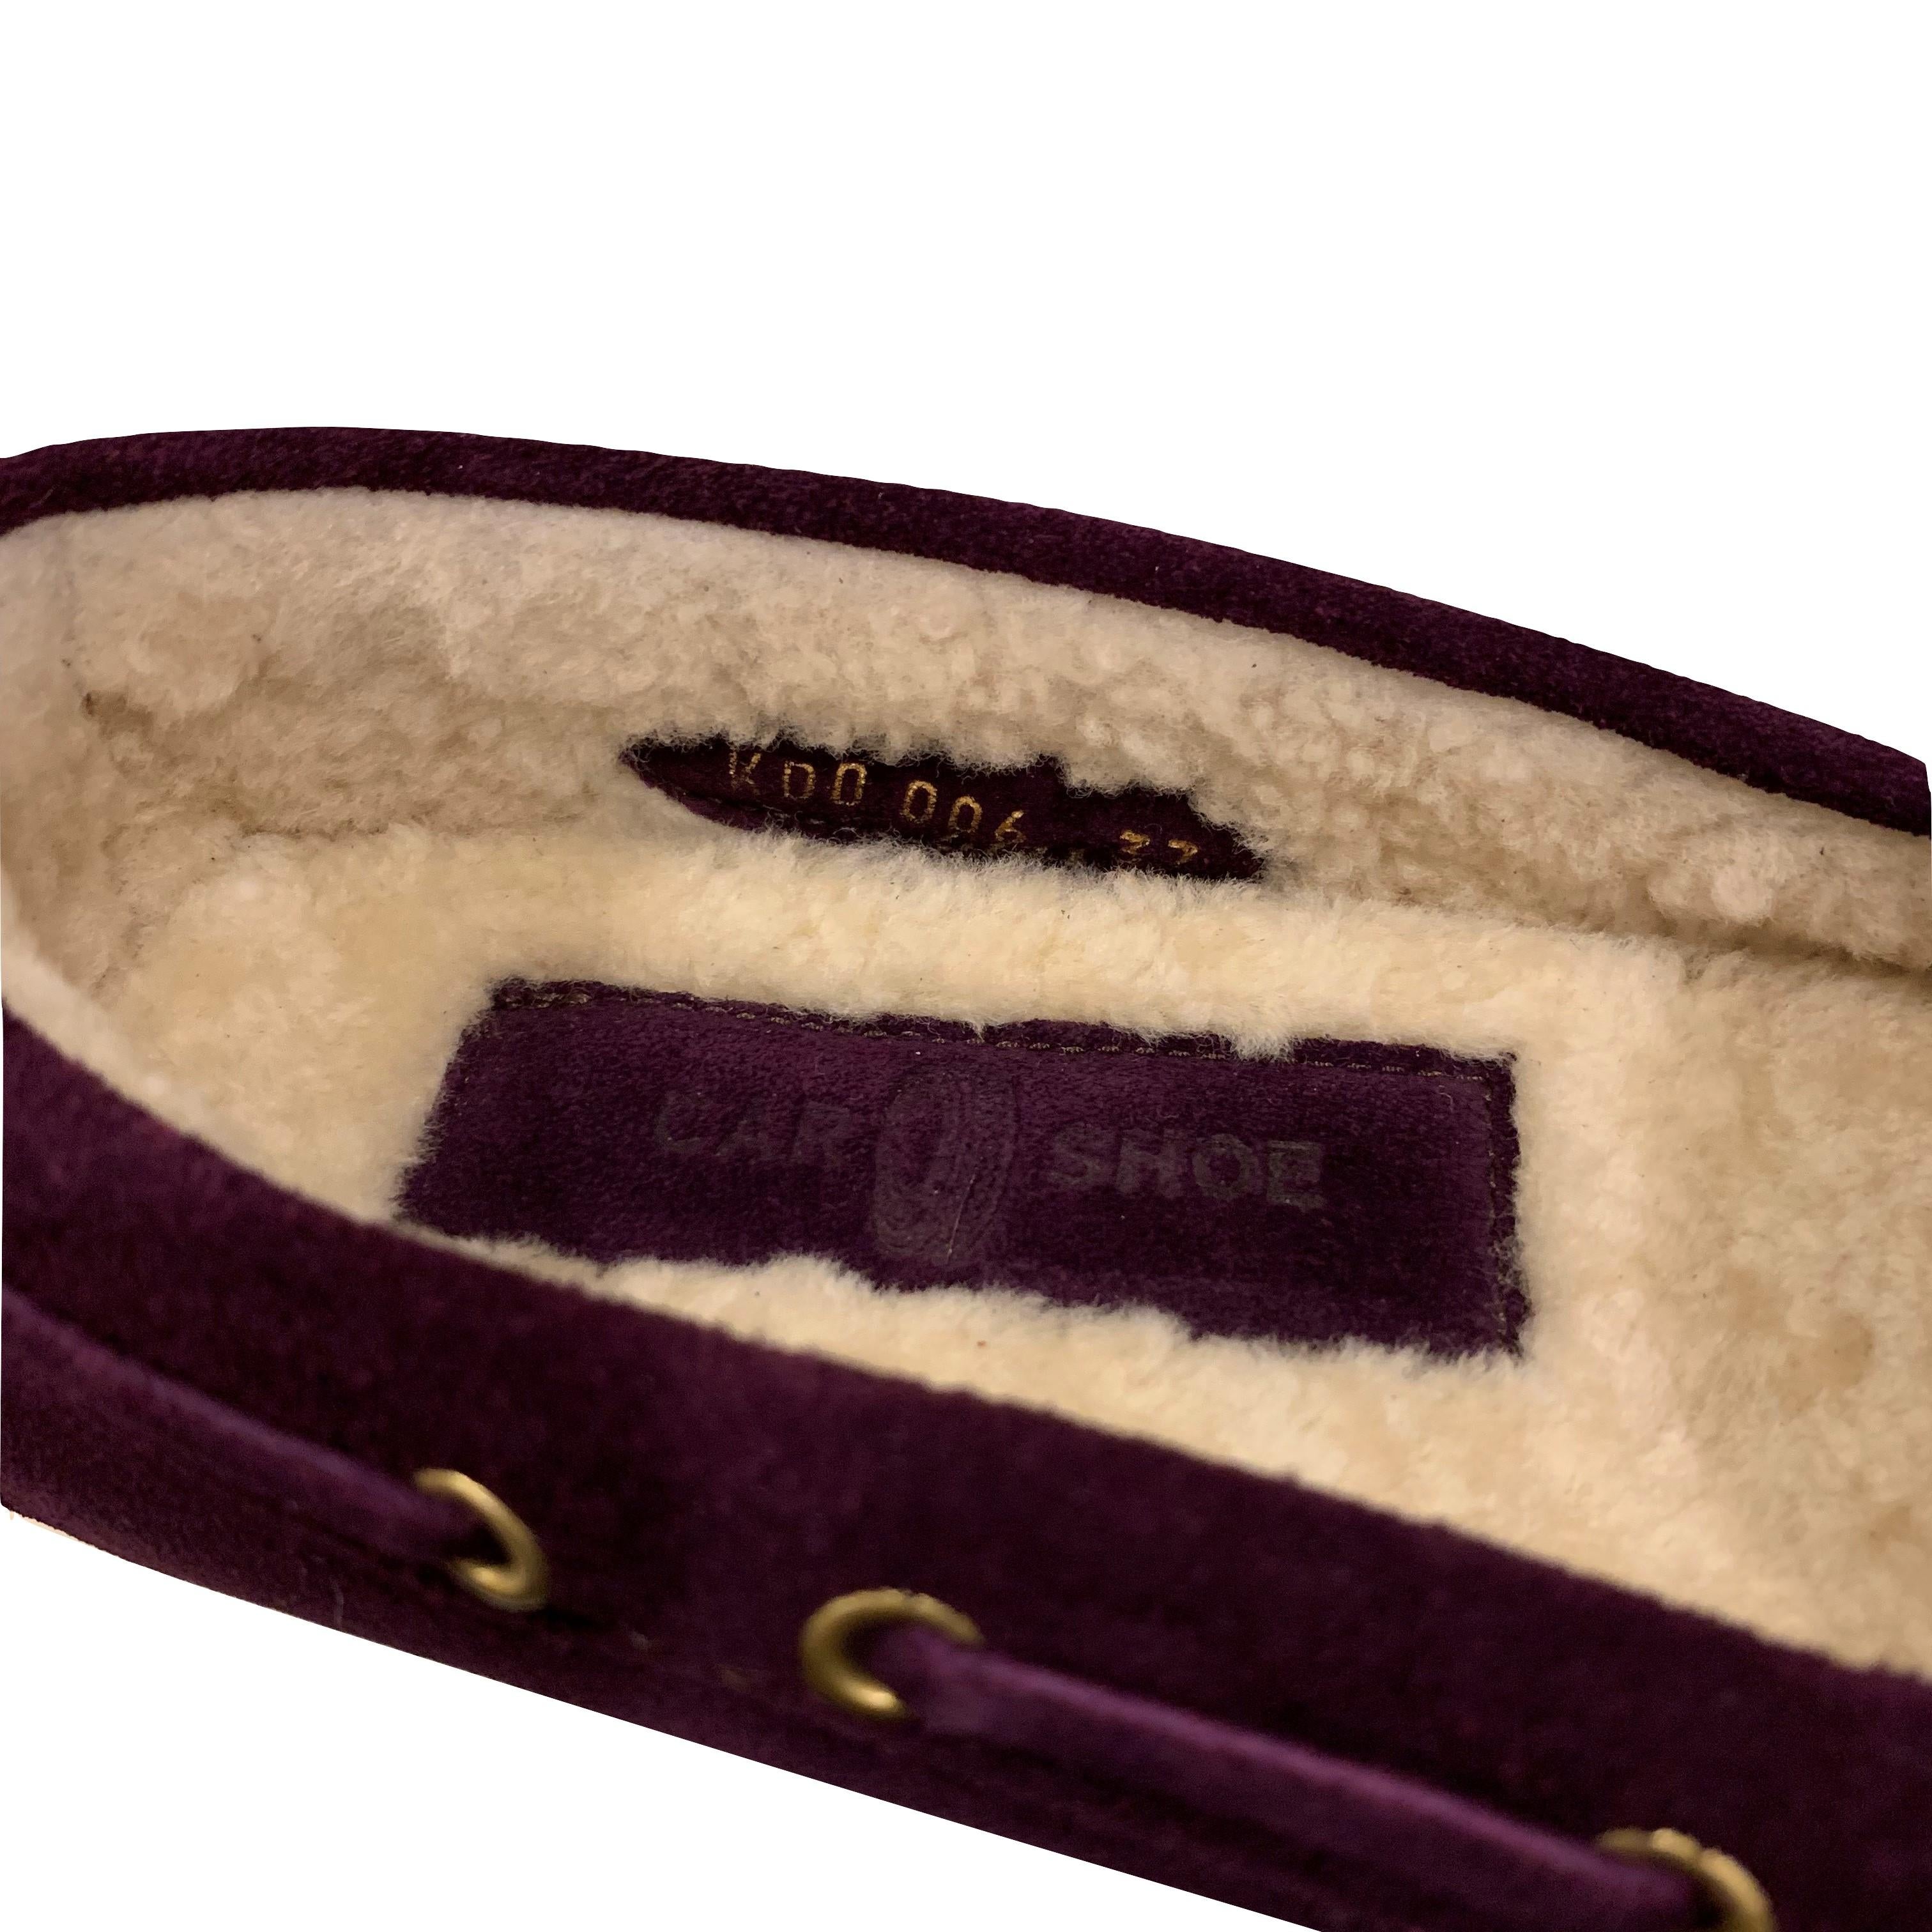  New The Original Prada Car Shoe Flat Moccasin Shearling House Driving  Sz 38 In New Condition In Leesburg, VA